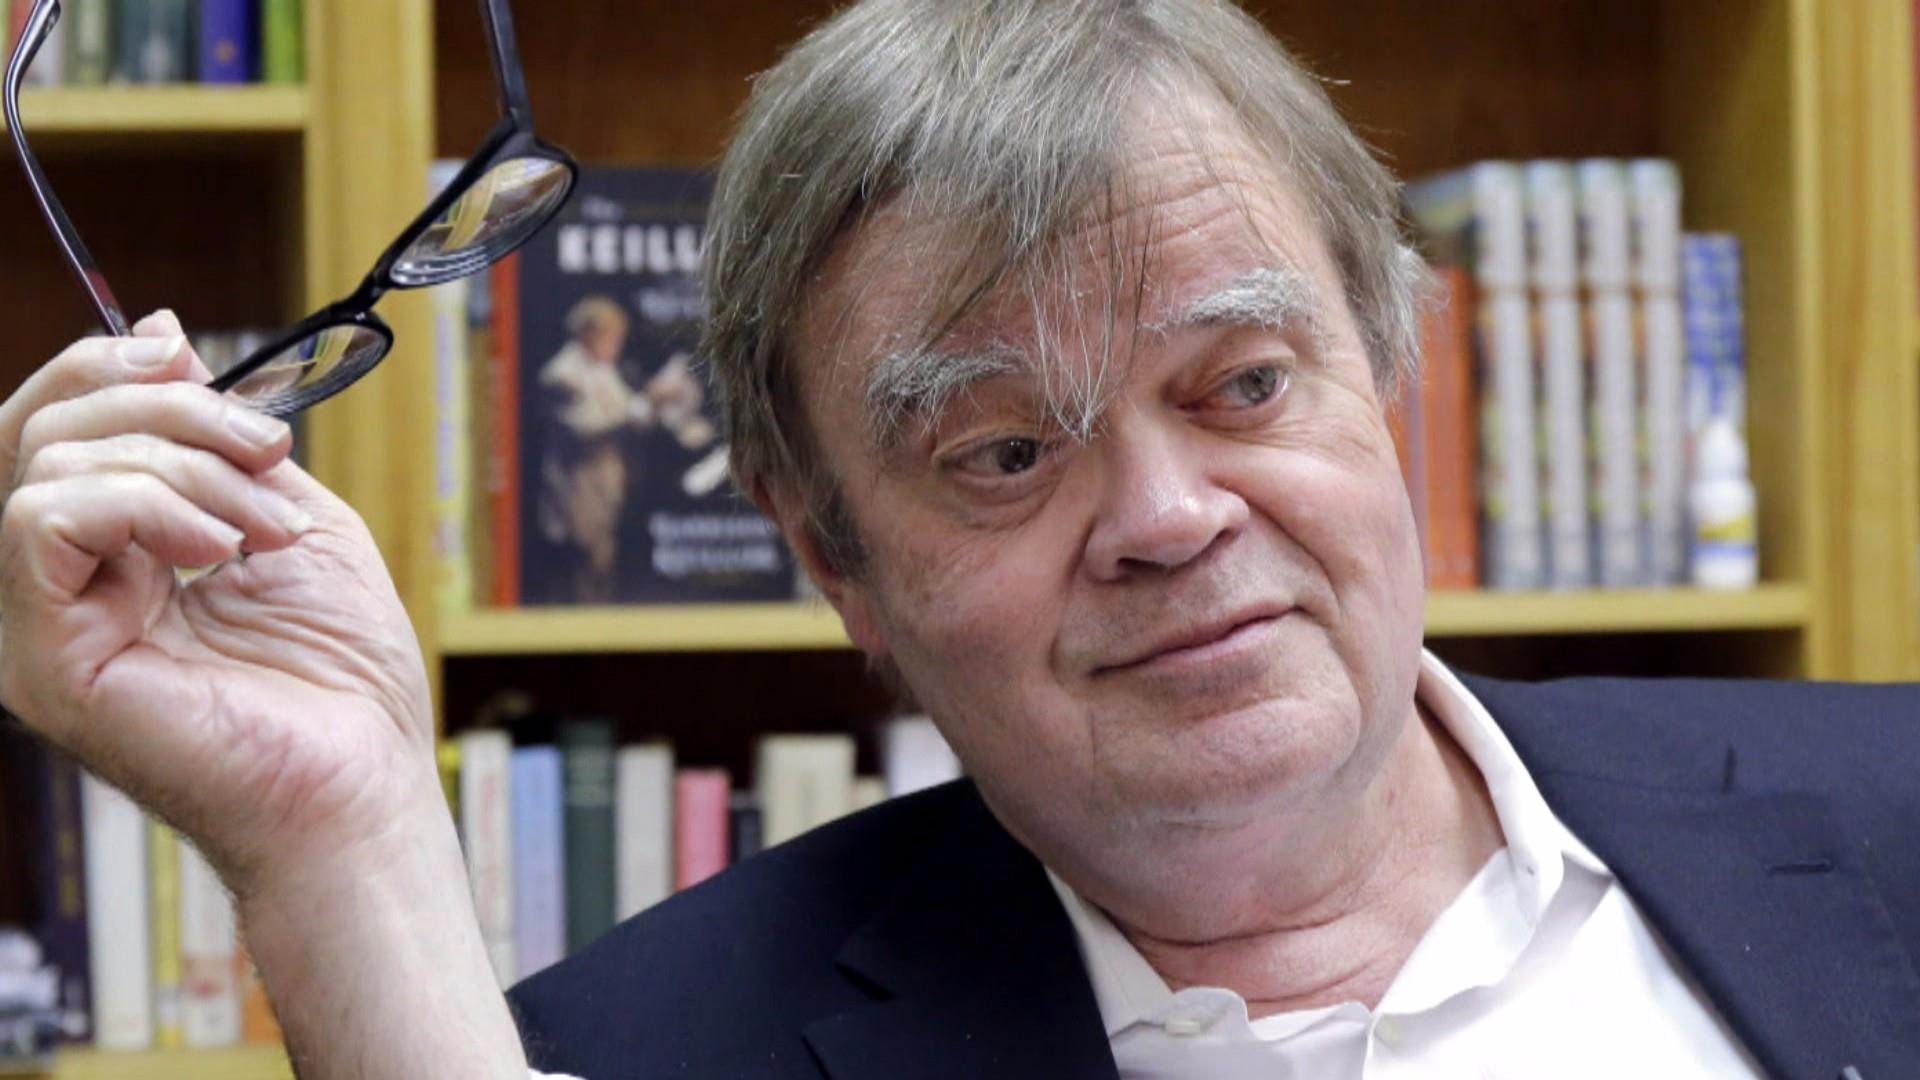 From Nov.: Garrison Keillor fired amid allegations of sexual misconduct